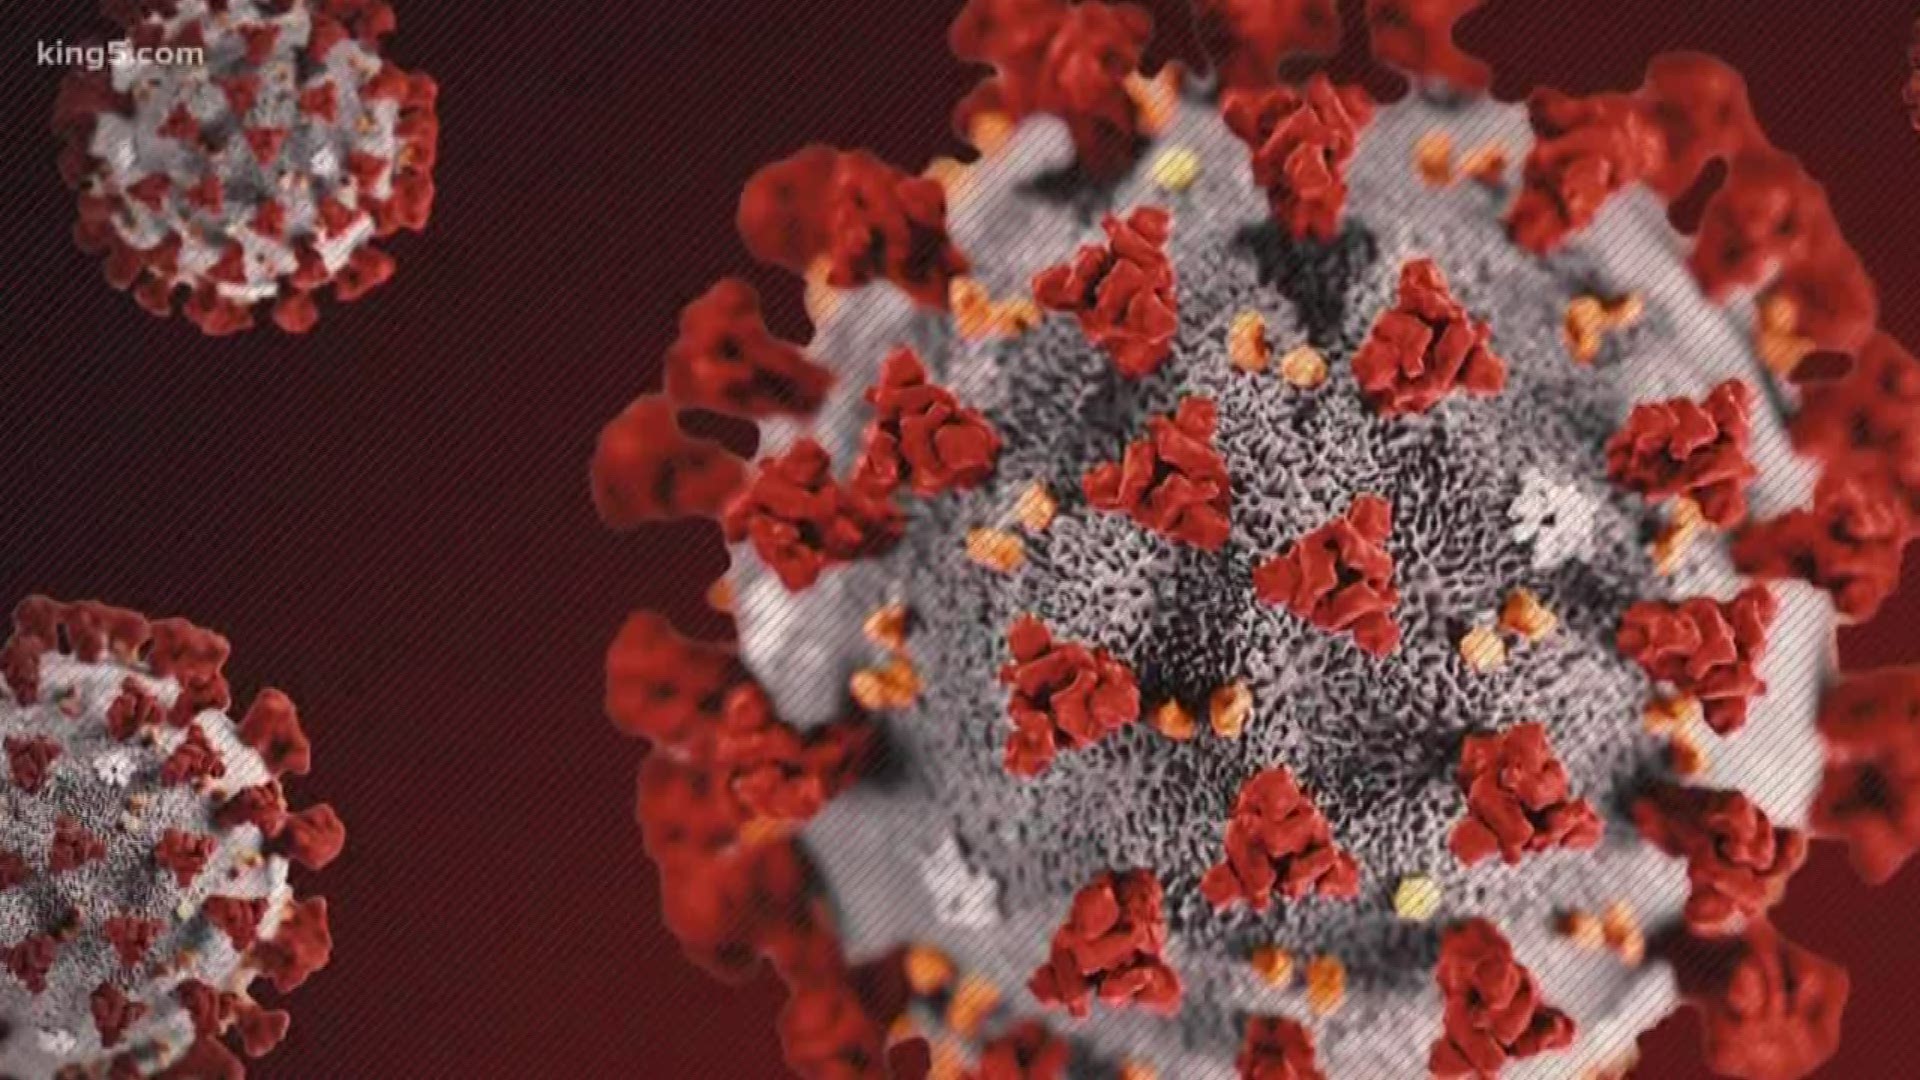 Six people have died and a total of 18 people in King and Snohomish counties have tested positive for 2019 novel coronavirus.